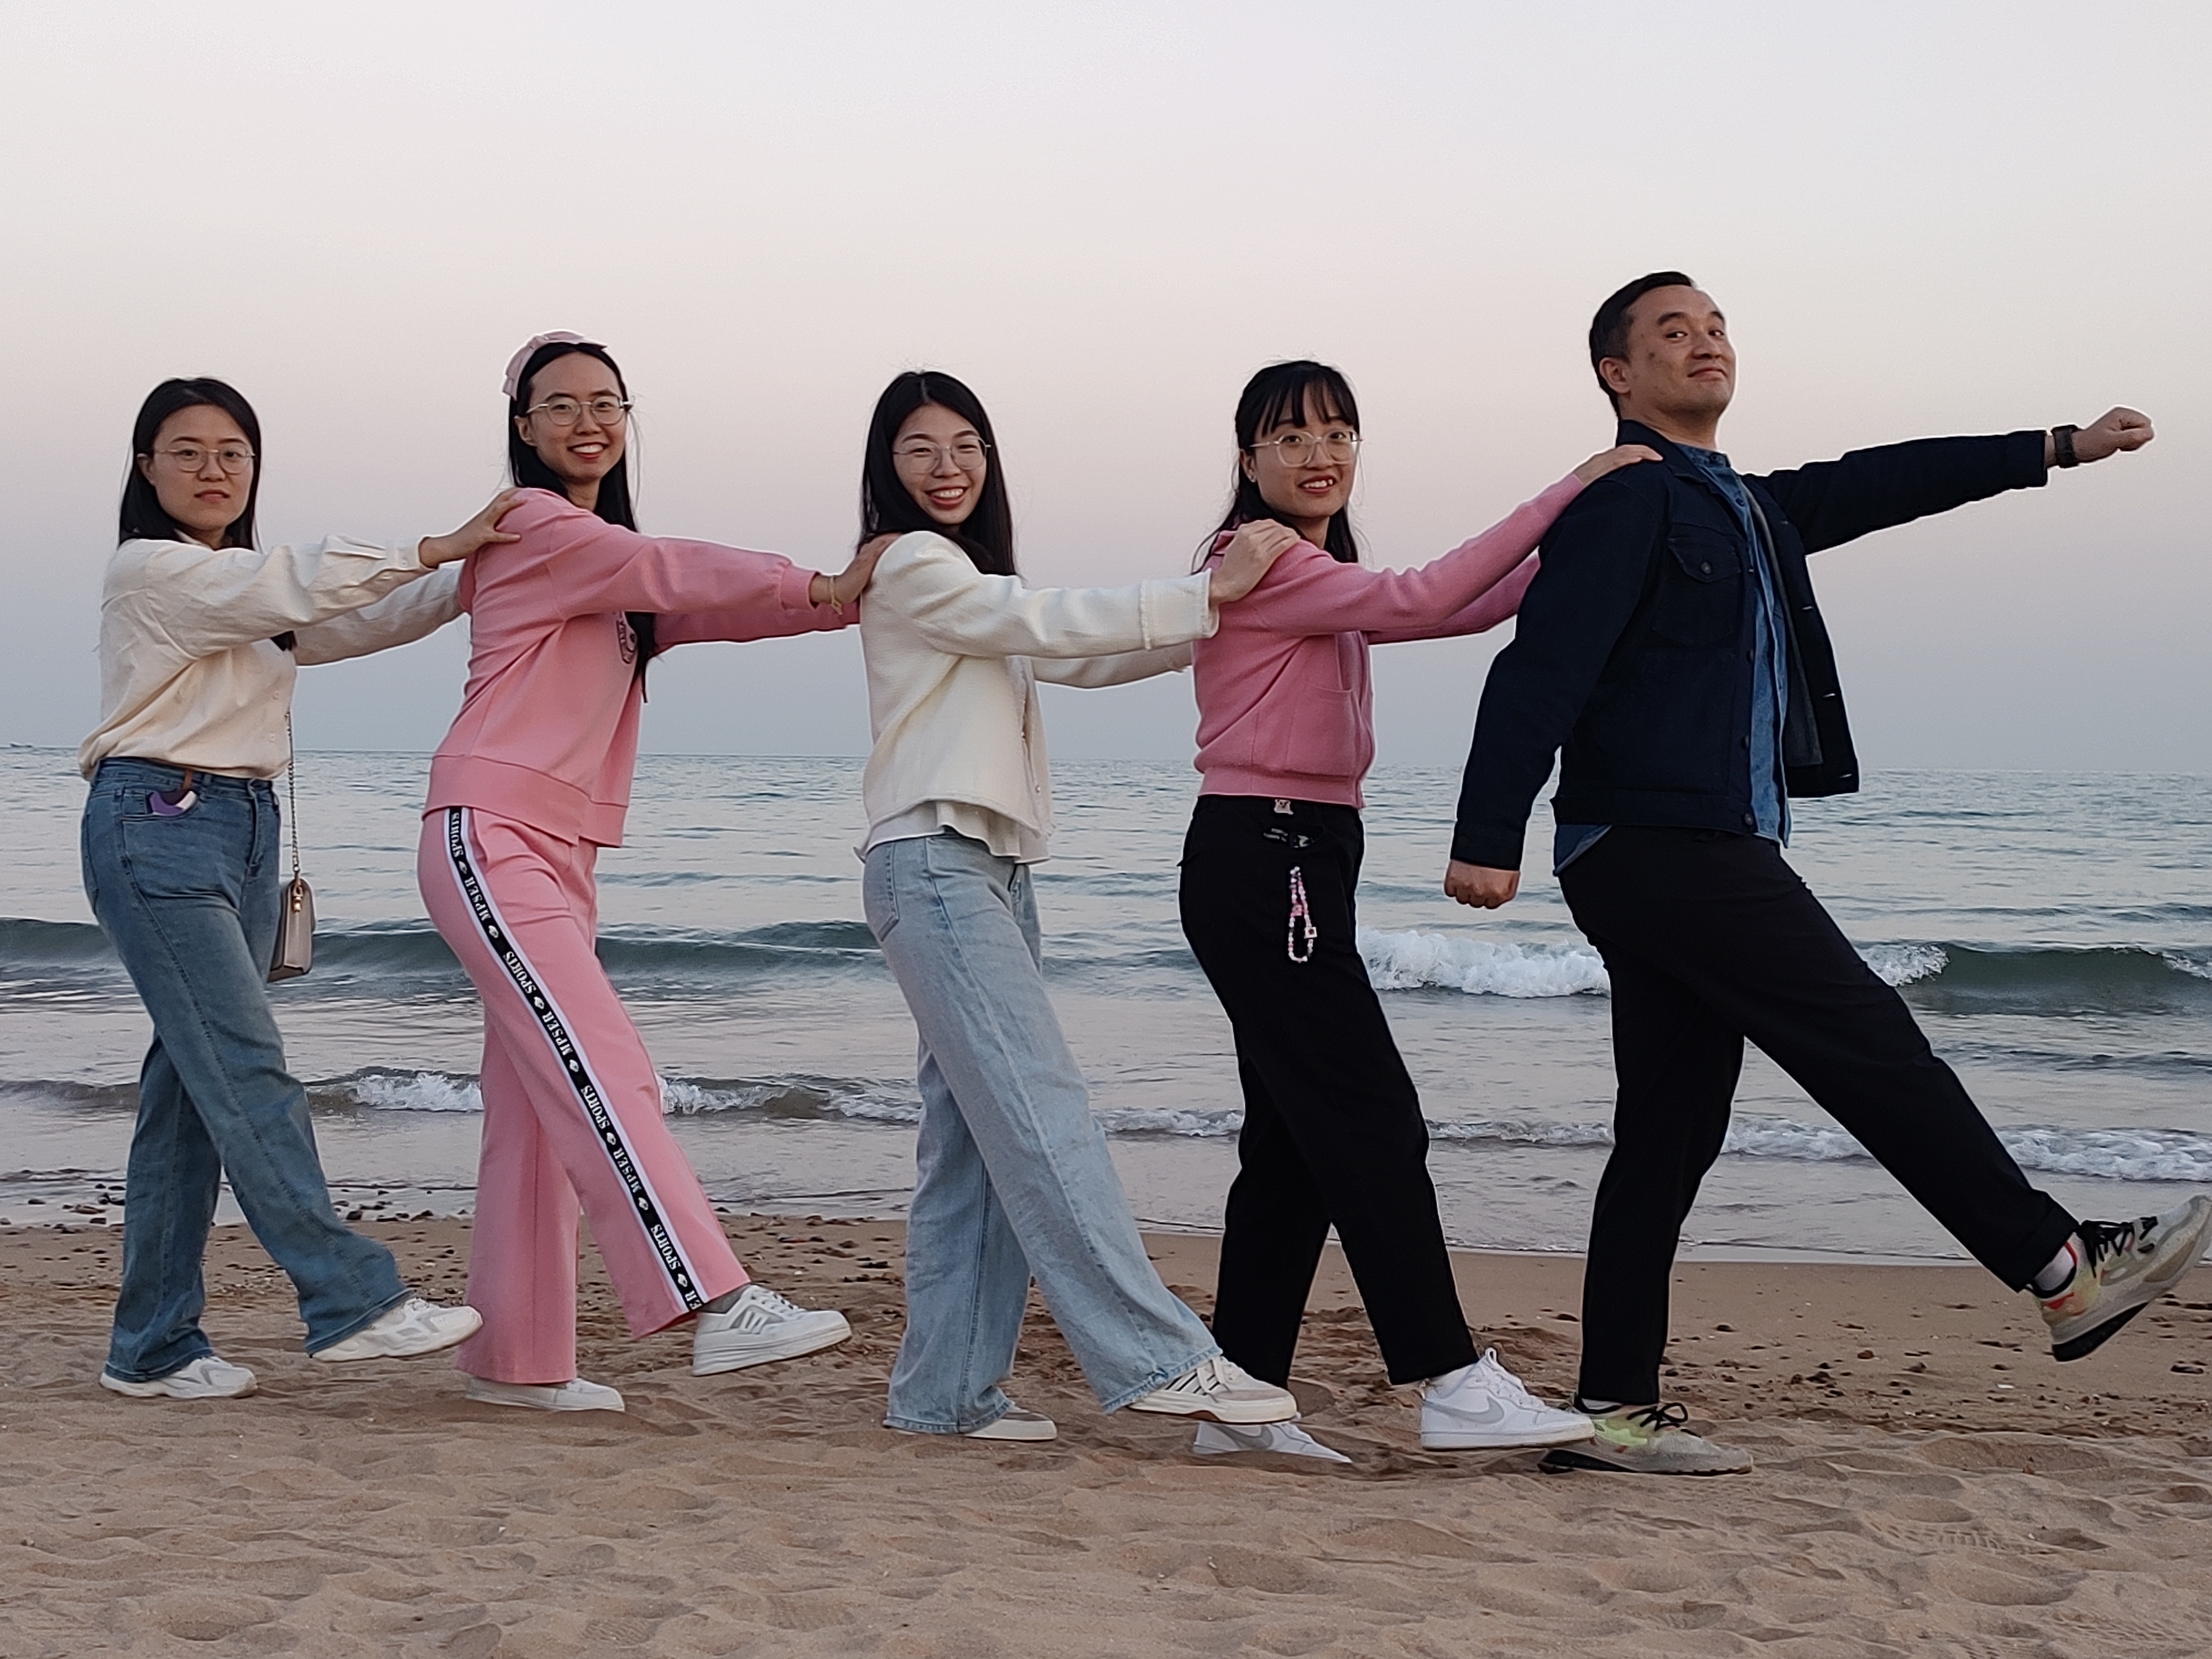 Ding-Fu and the girls in Qingdao during ICFM2023.